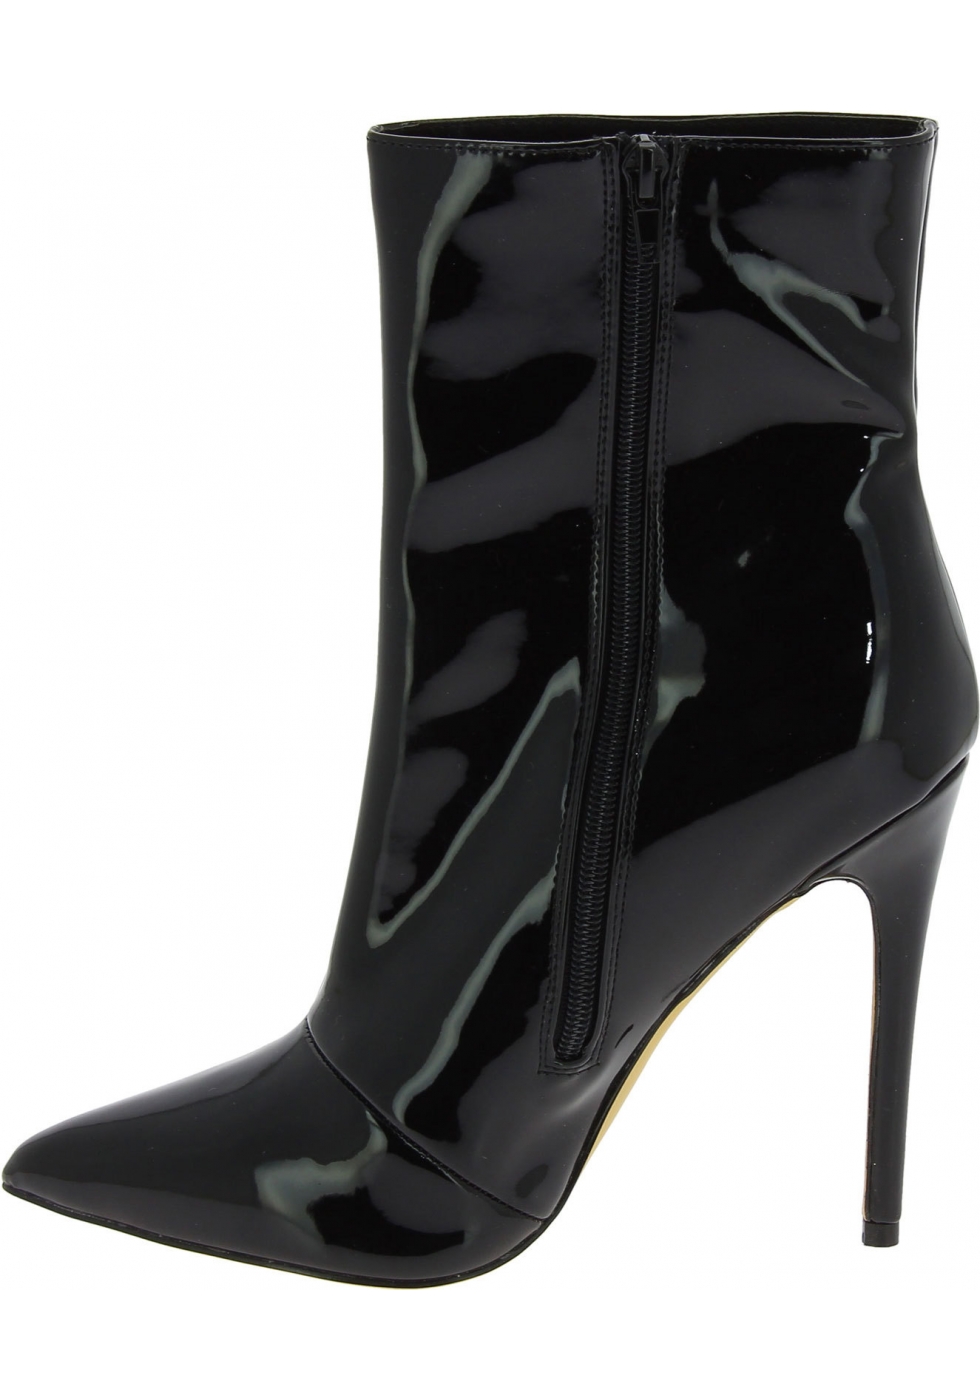 Steve Madden Women's pointy high stiletto ankle boots black patent ...